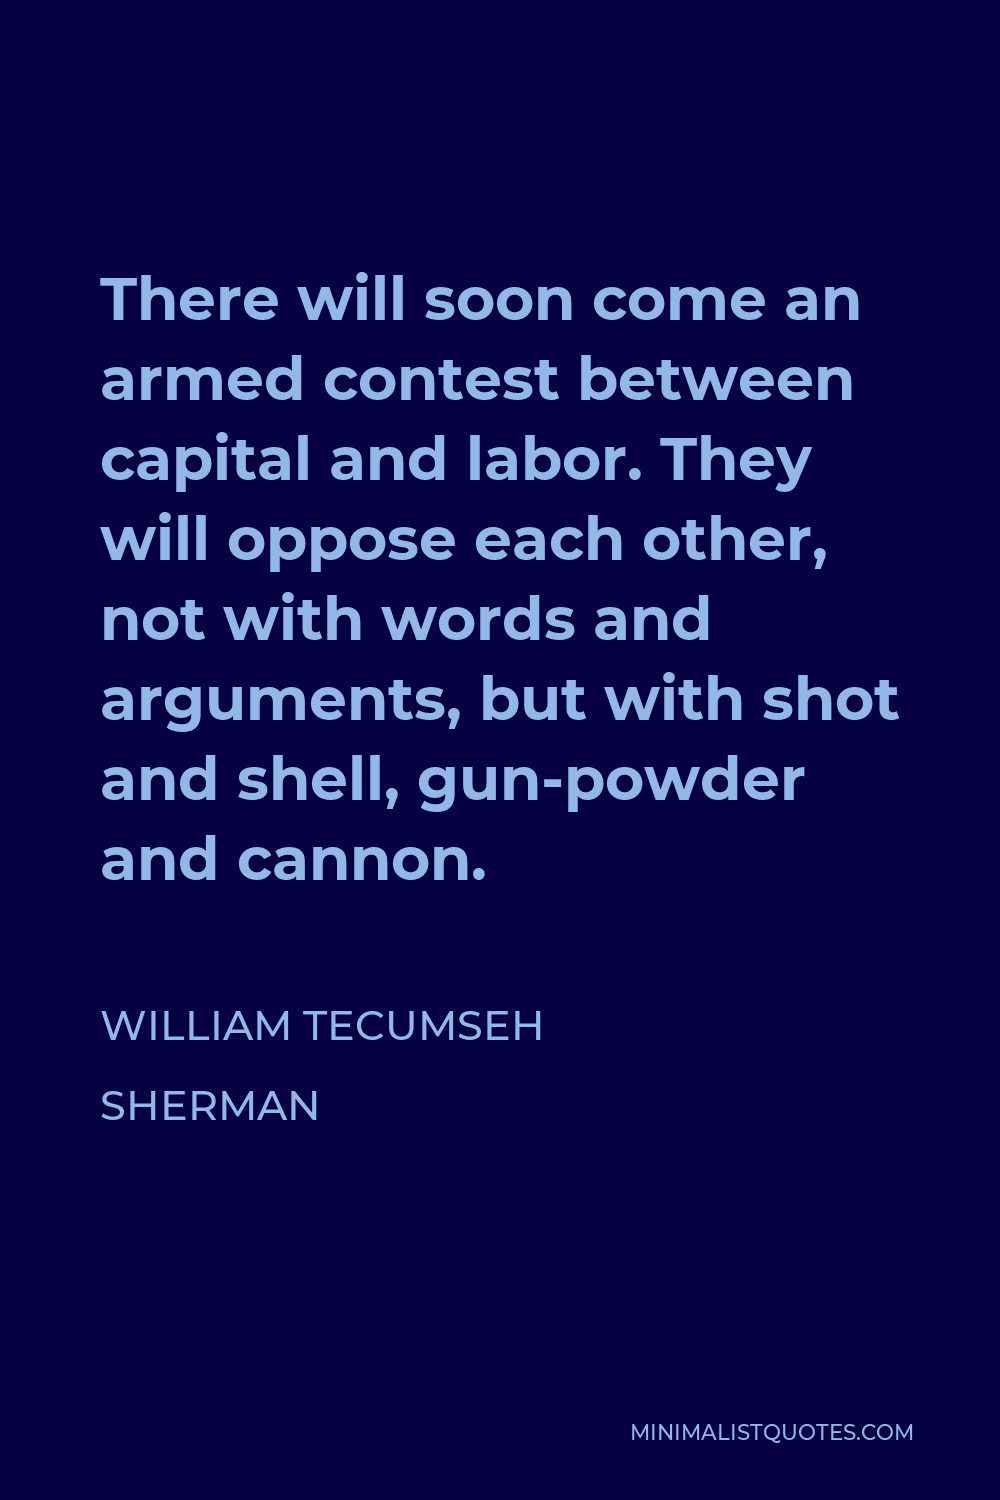 William Tecumseh Sherman Quote - There will soon come an armed contest between capital and labor. They will oppose each other, not with words and arguments, but with shot and shell, gun-powder and cannon.